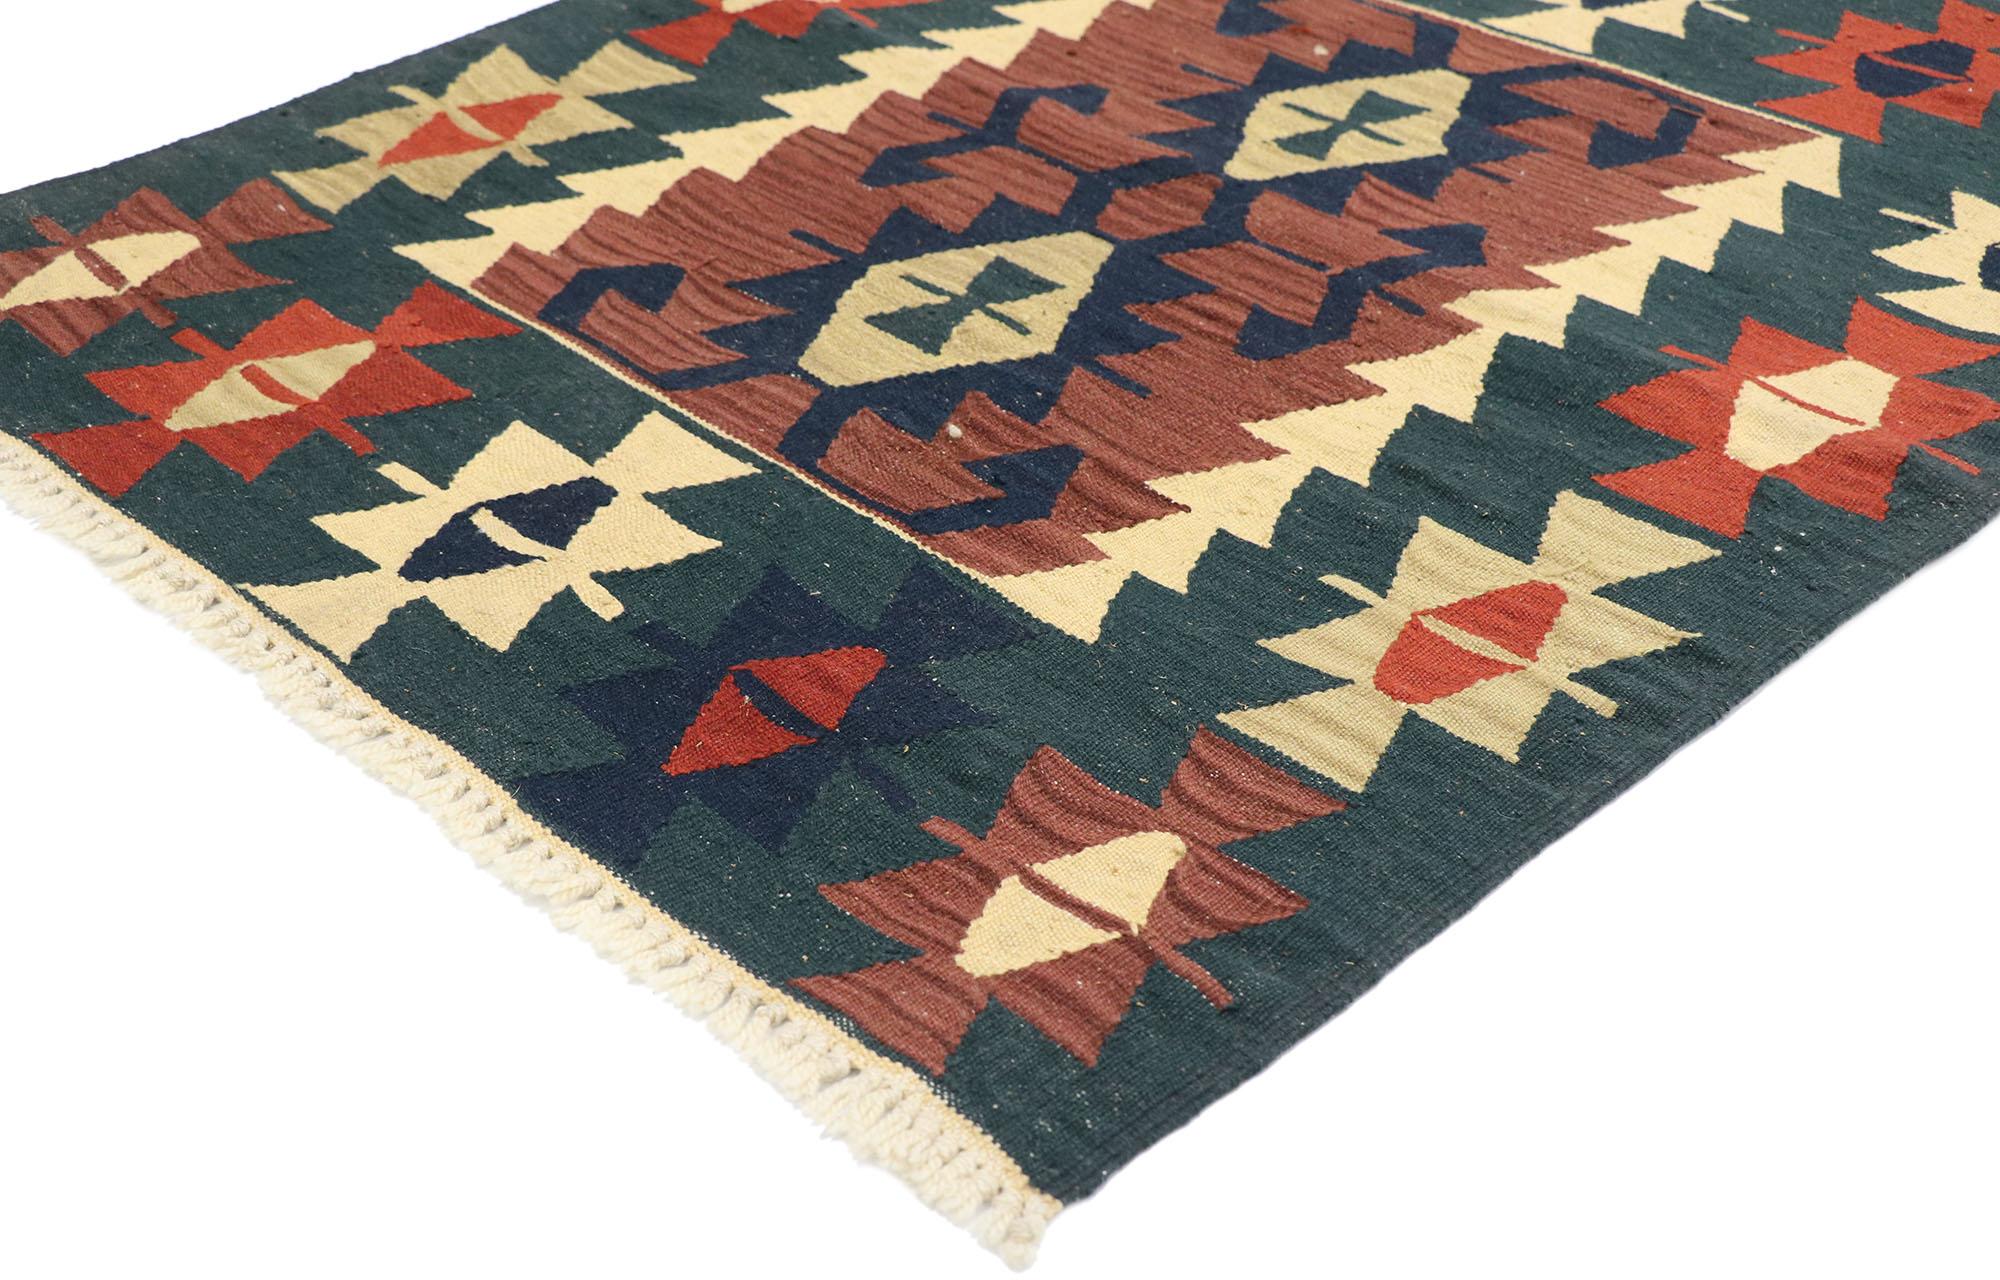 77914 vintage Persian Shiraz Kilim rug with Tribal style 03'01 x 03'07. Full of tiny details and a bold expressive design combined with vibrant colors and tribal style, this hand-woven wool vintage Persian Shiraz kilim rug is a captivating vision of